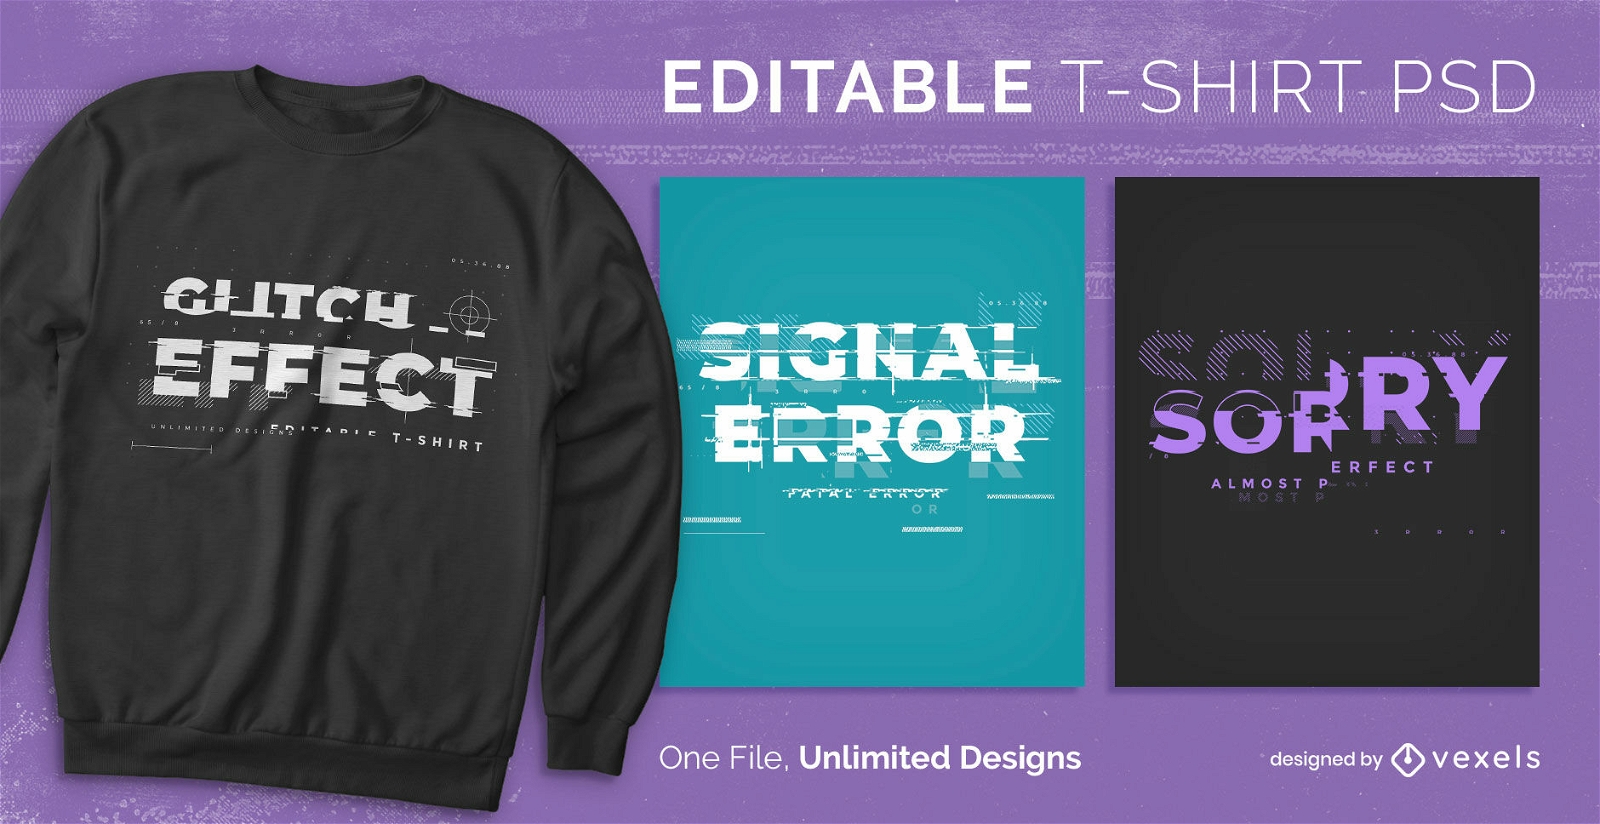 Glitch text effect scalable t-shirt psd